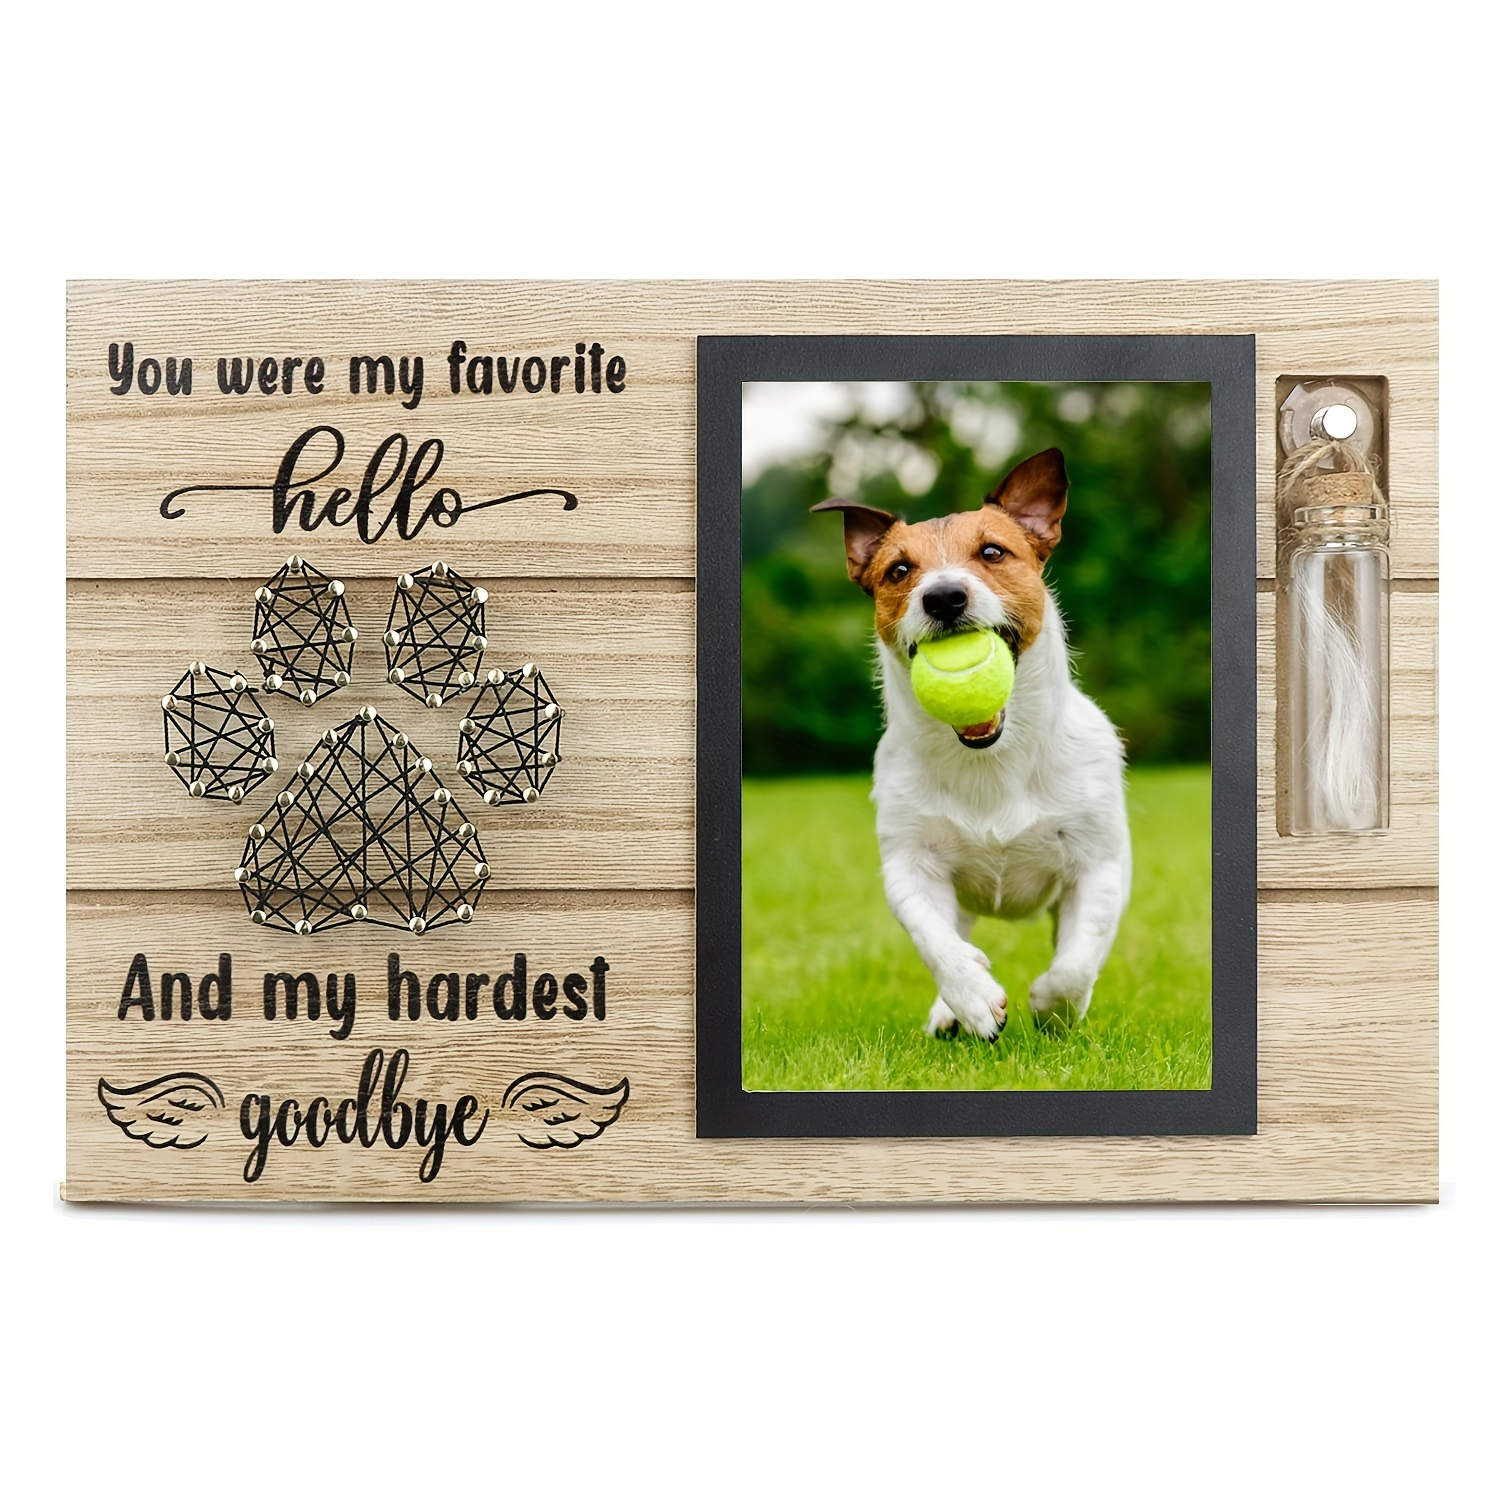 Pet Memorial Gift, Loved You Your Whole Life, Pet Sympathy, Free  Personalization, Pet Loss Frame, Dog Memorial Gift, Clip Frame -  Canada